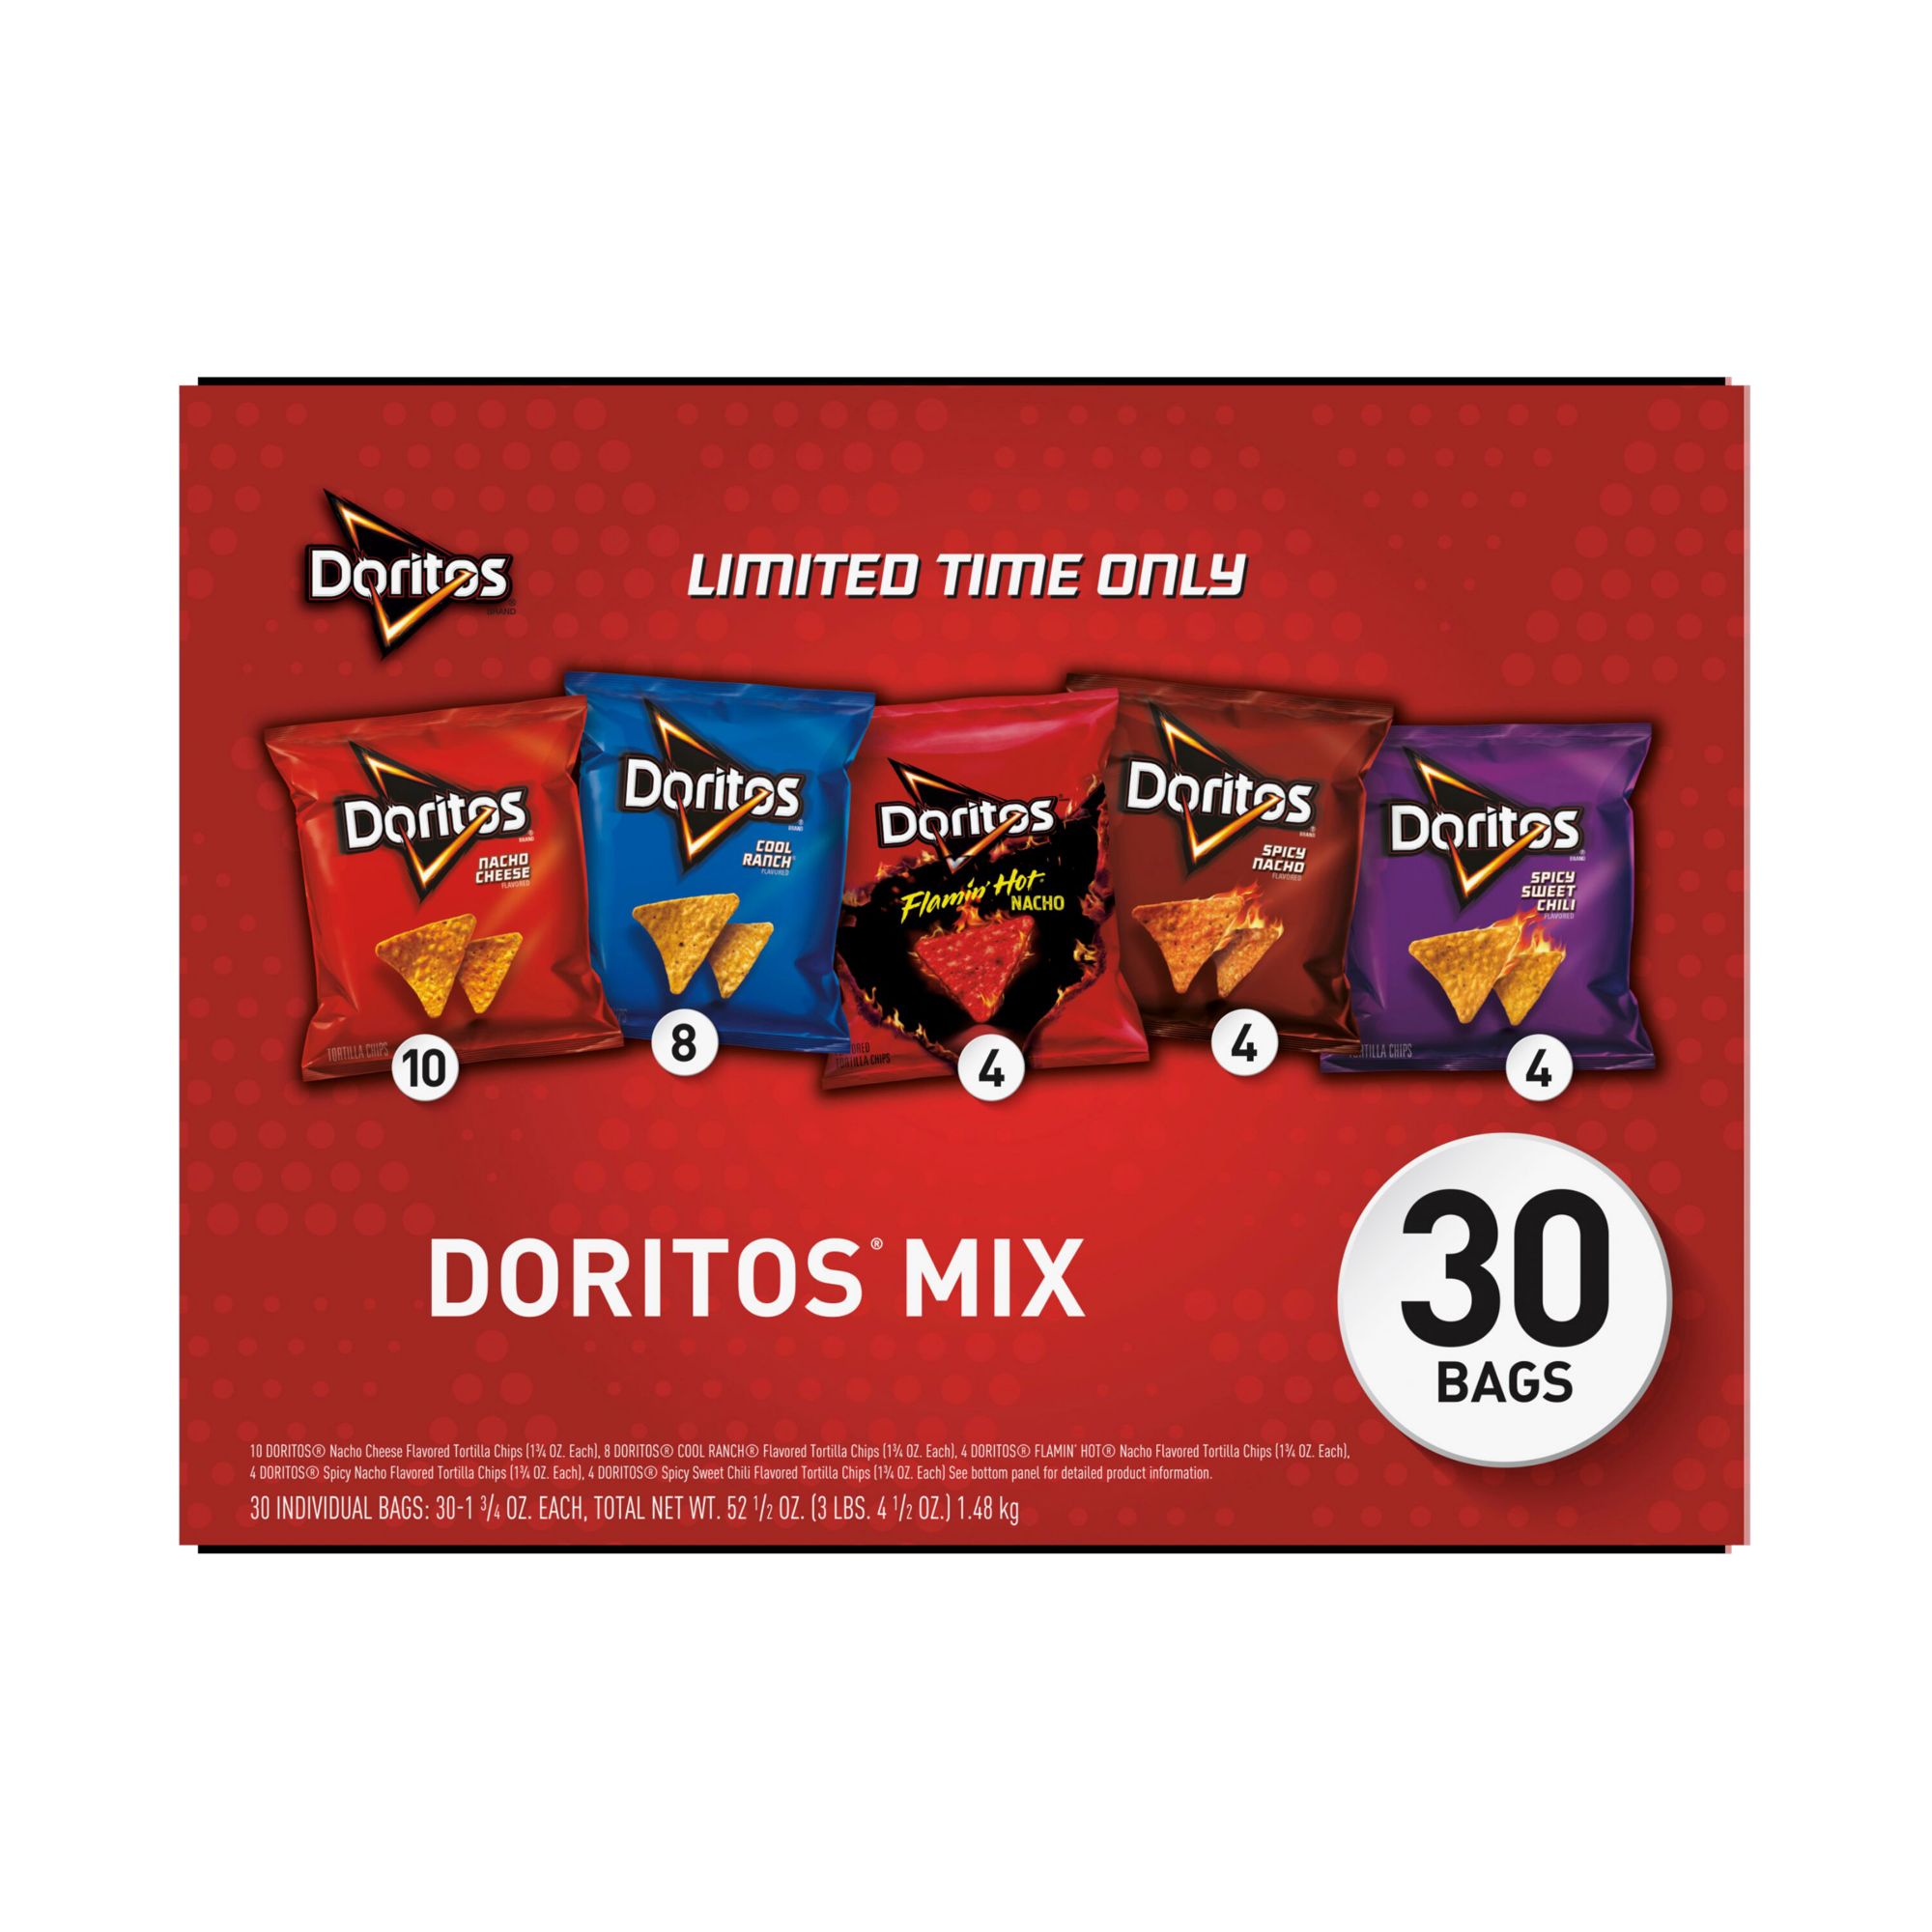 Doritos Flavored Tortilla Chips, Cool Ranch, 1 Ounce (Pack of 40)